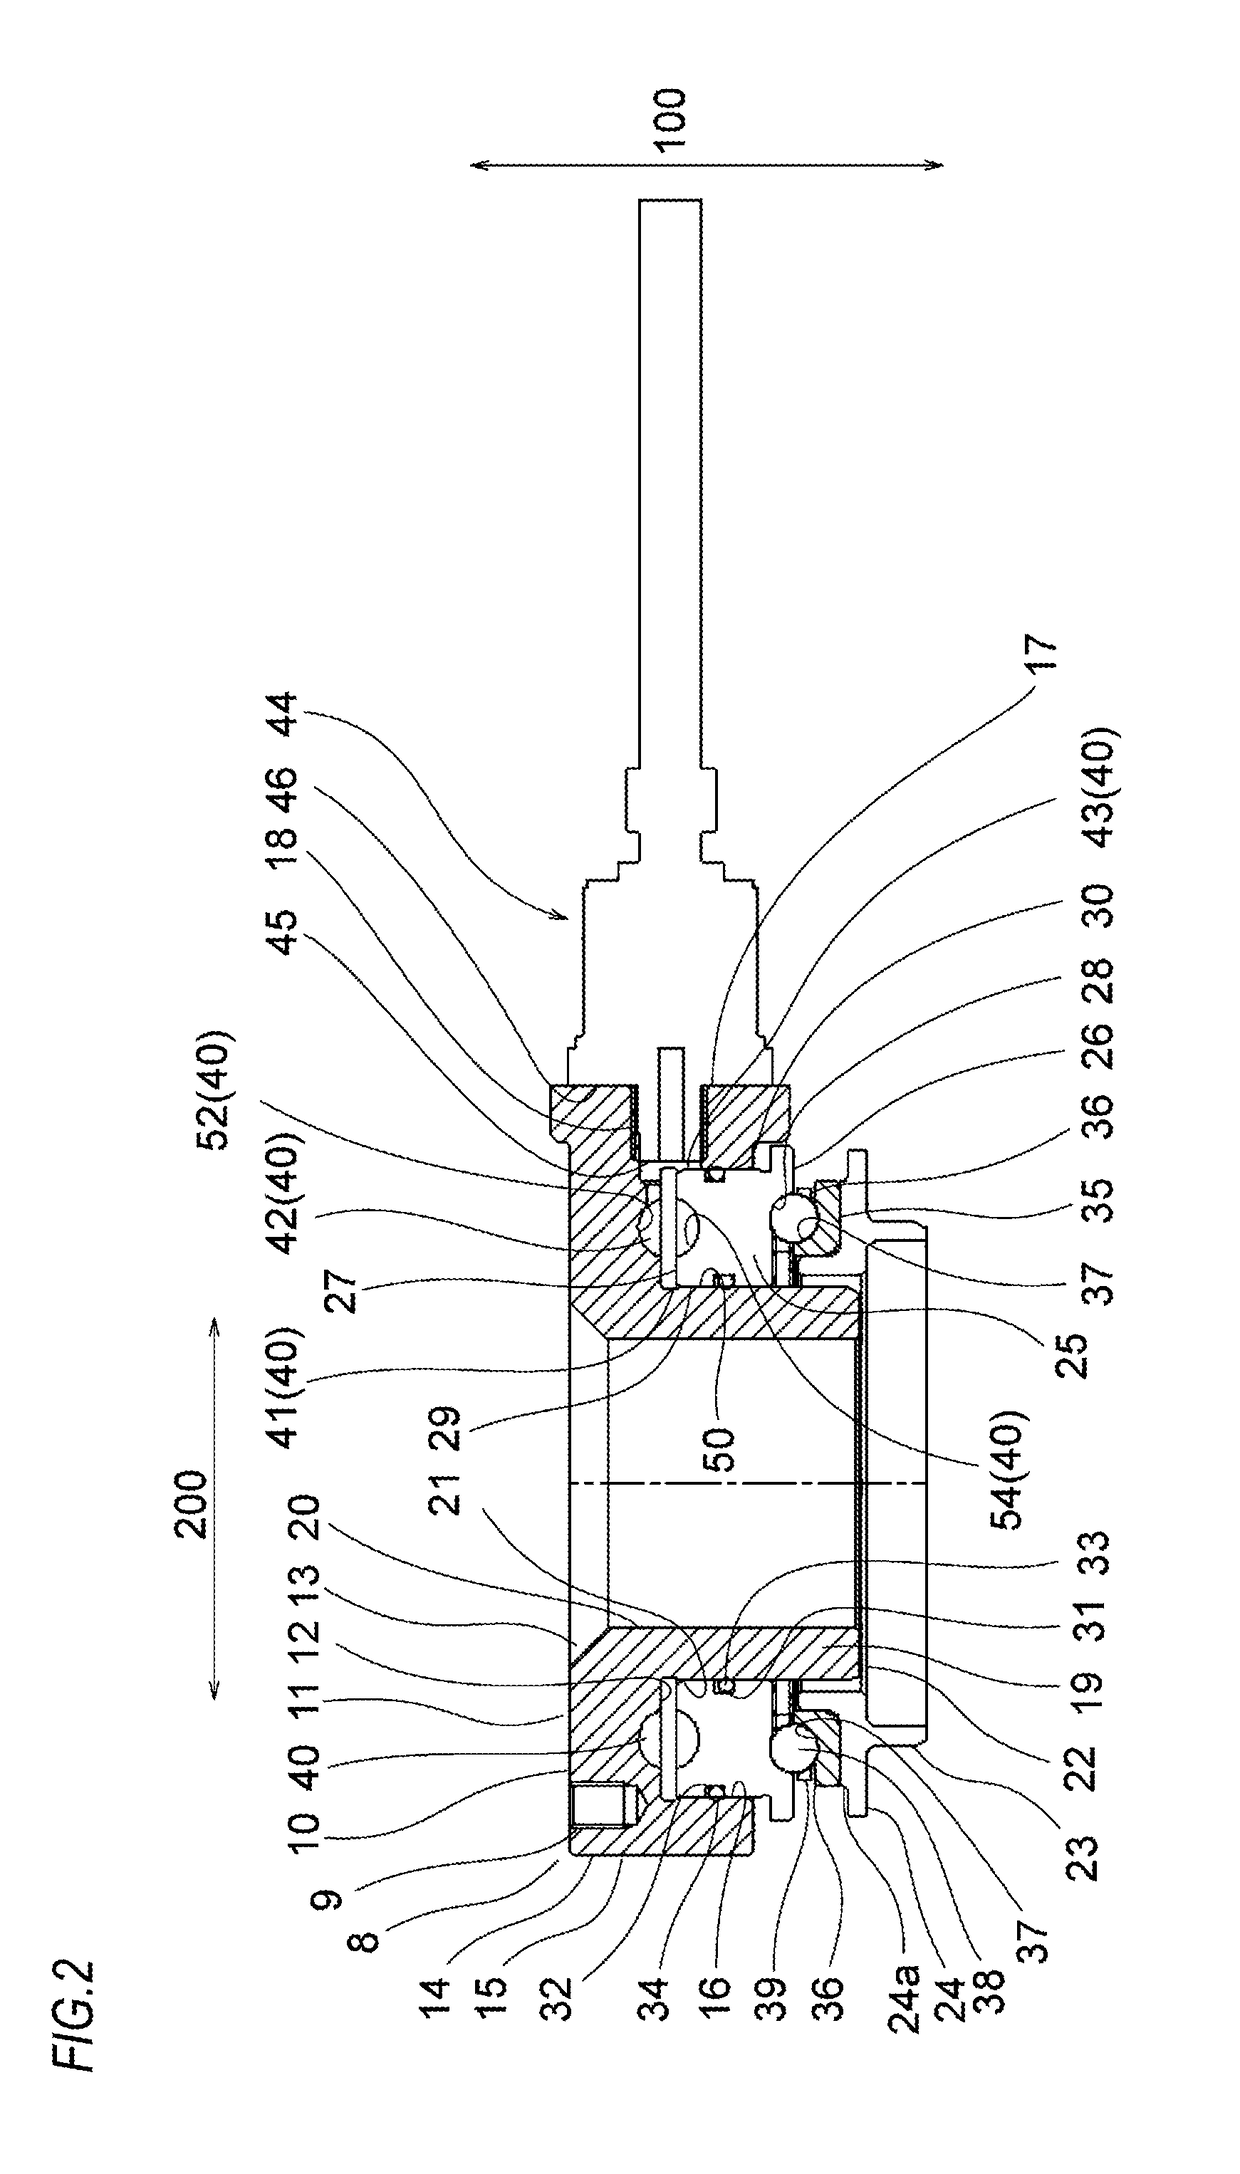 Load sensor-equipped bearing device